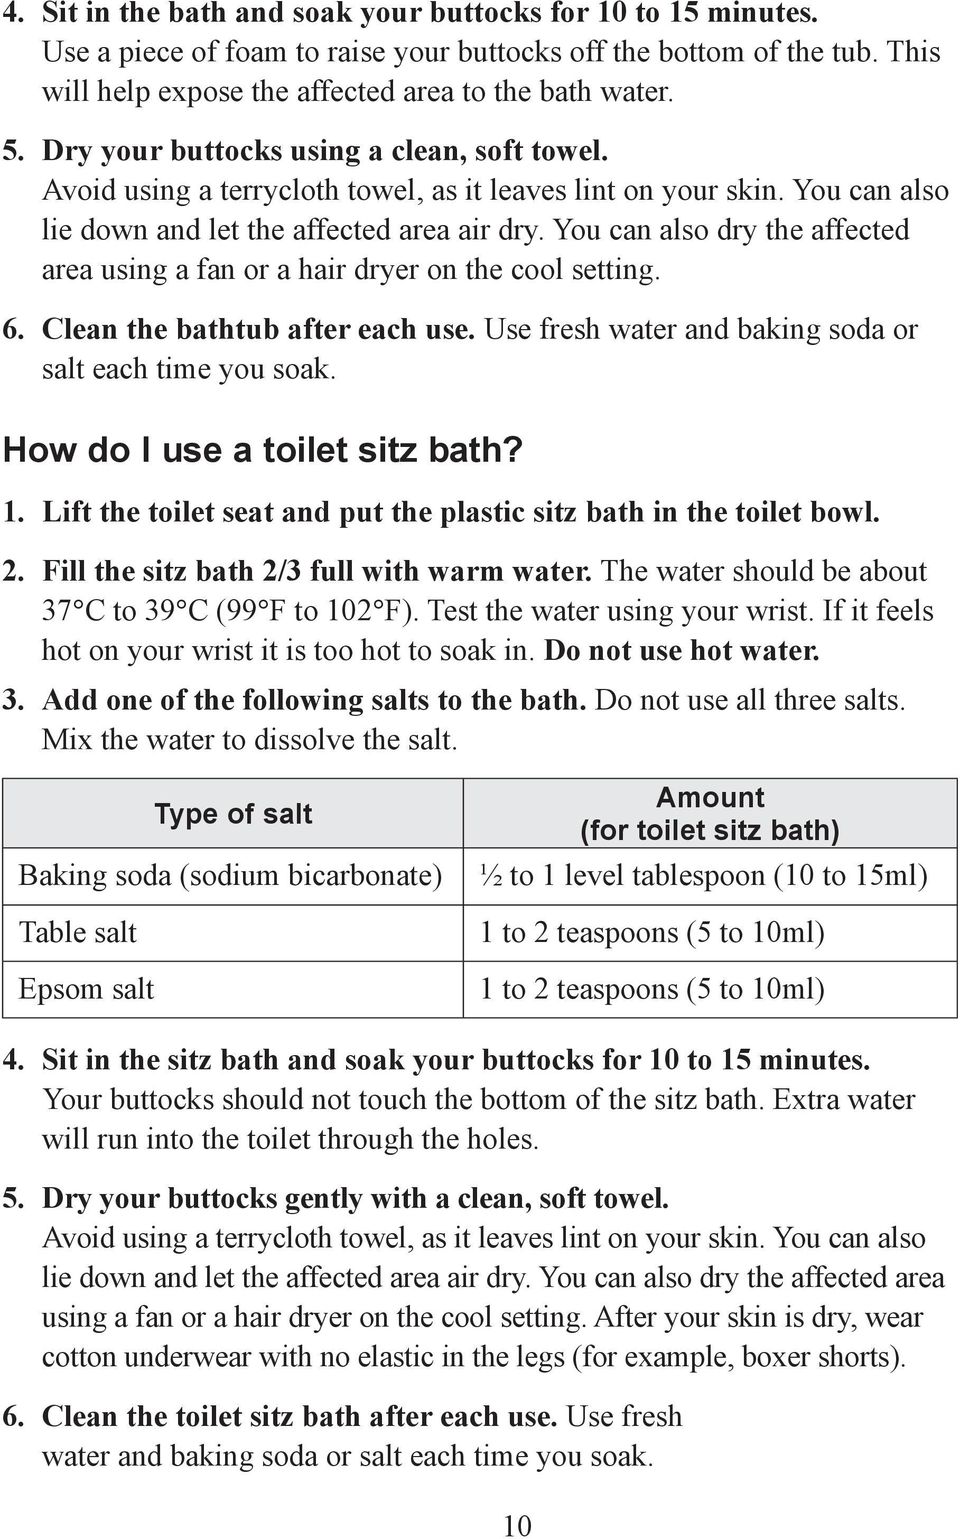 You can also dry the affected area using a fan or a hair dryer on the cool setting. 6. Clean the bathtub after each use. Use fresh water and baking soda or salt each time you soak.